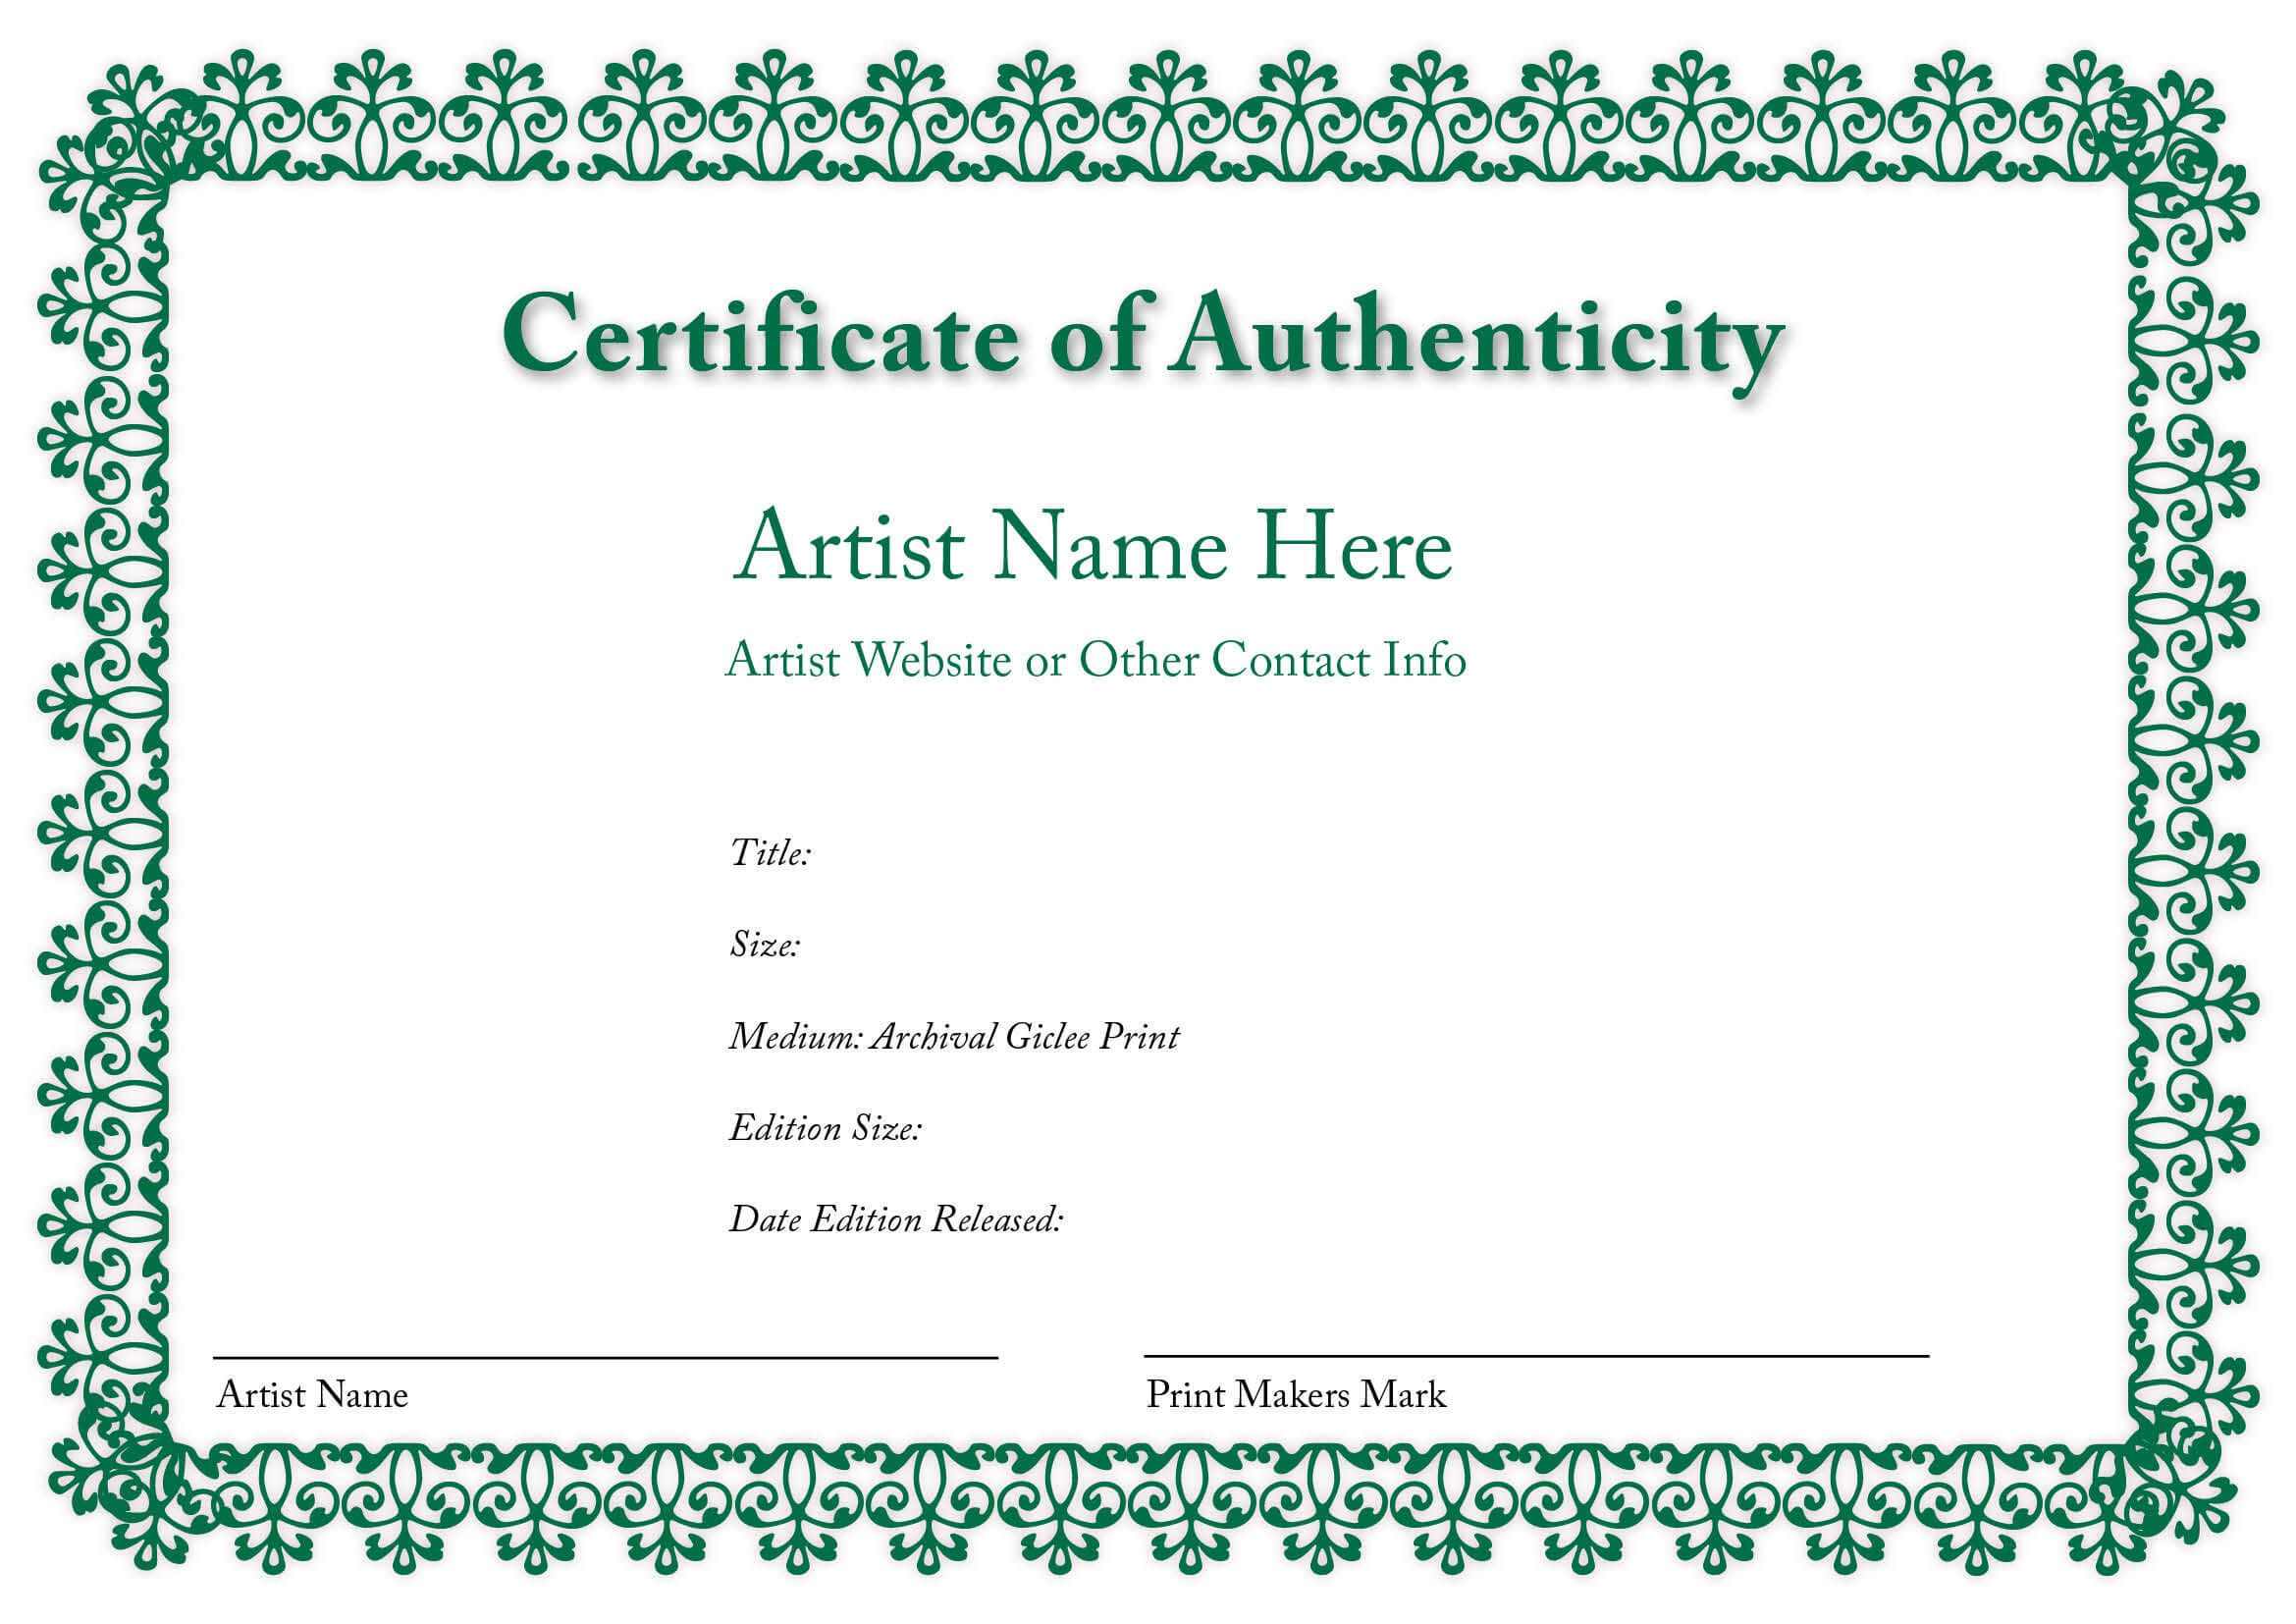 Certificate Of Authenticity Of An Art Print | Certificate Within Certificate Of Authenticity Photography Template